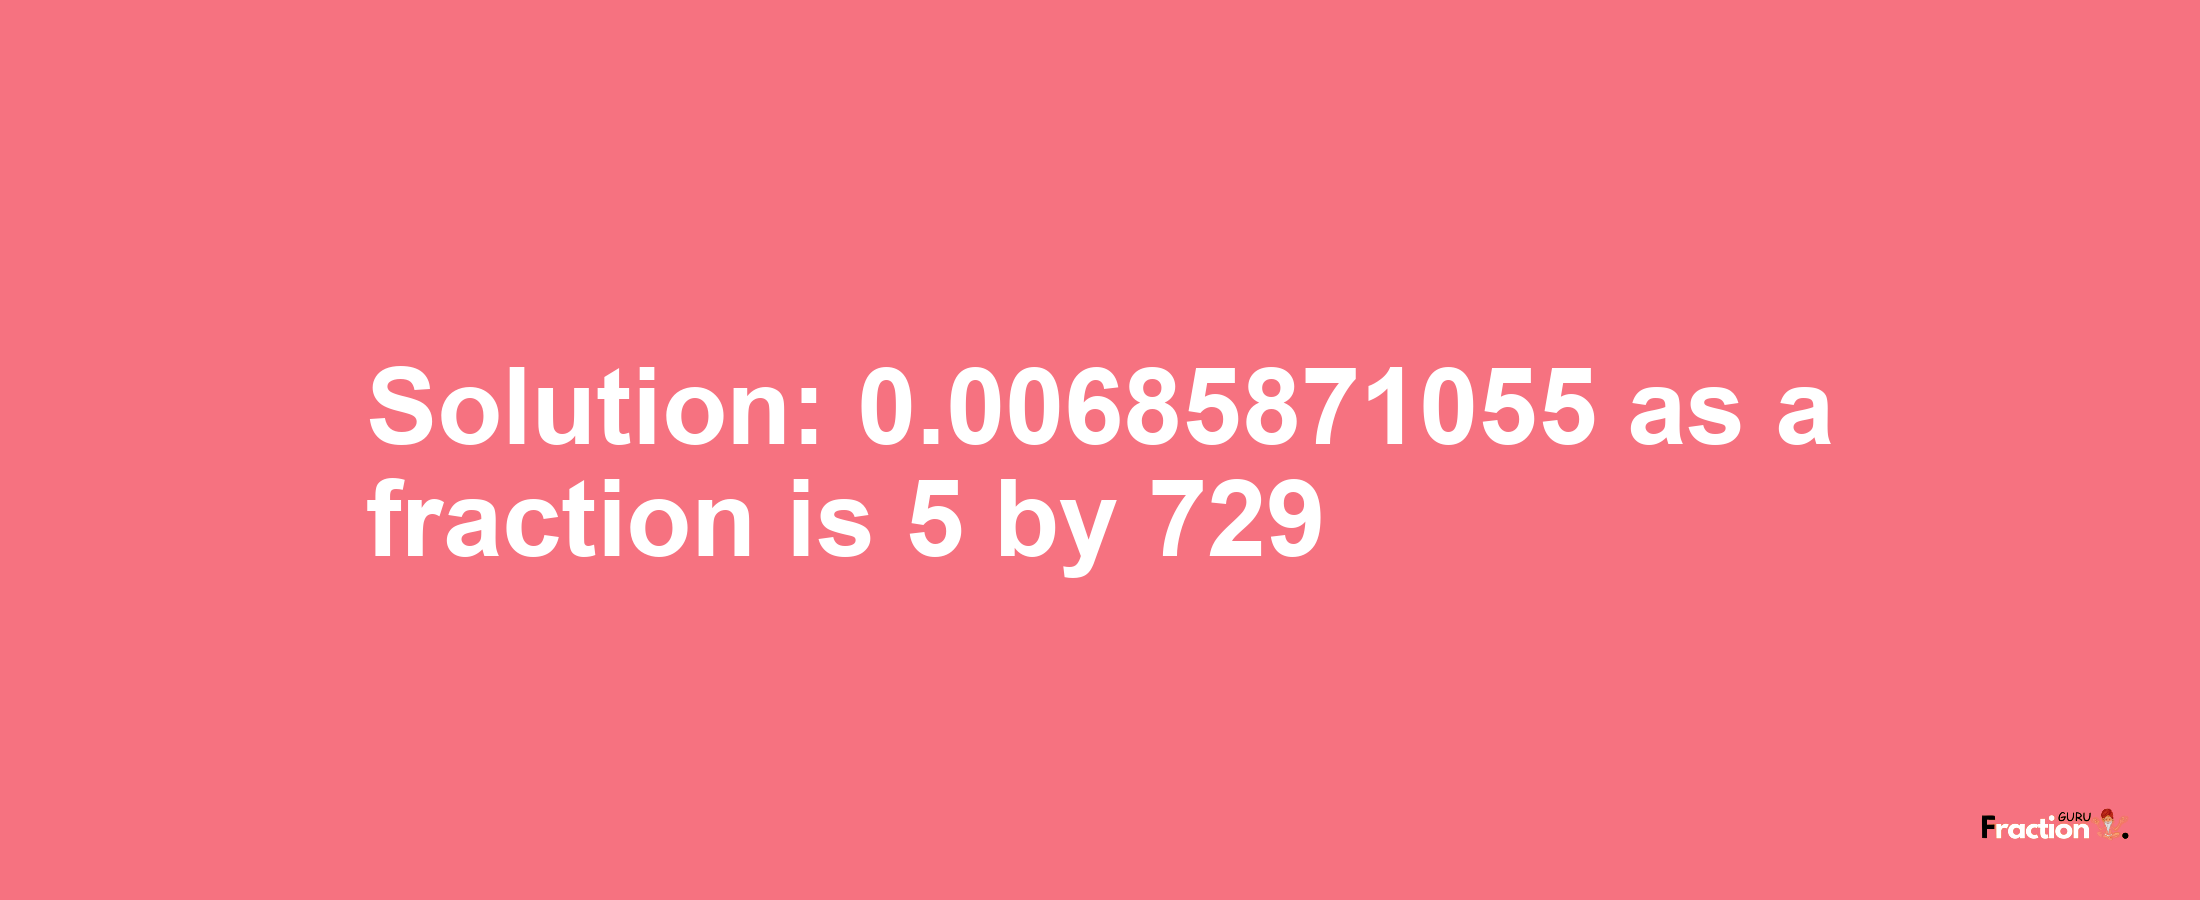 Solution:0.00685871055 as a fraction is 5/729